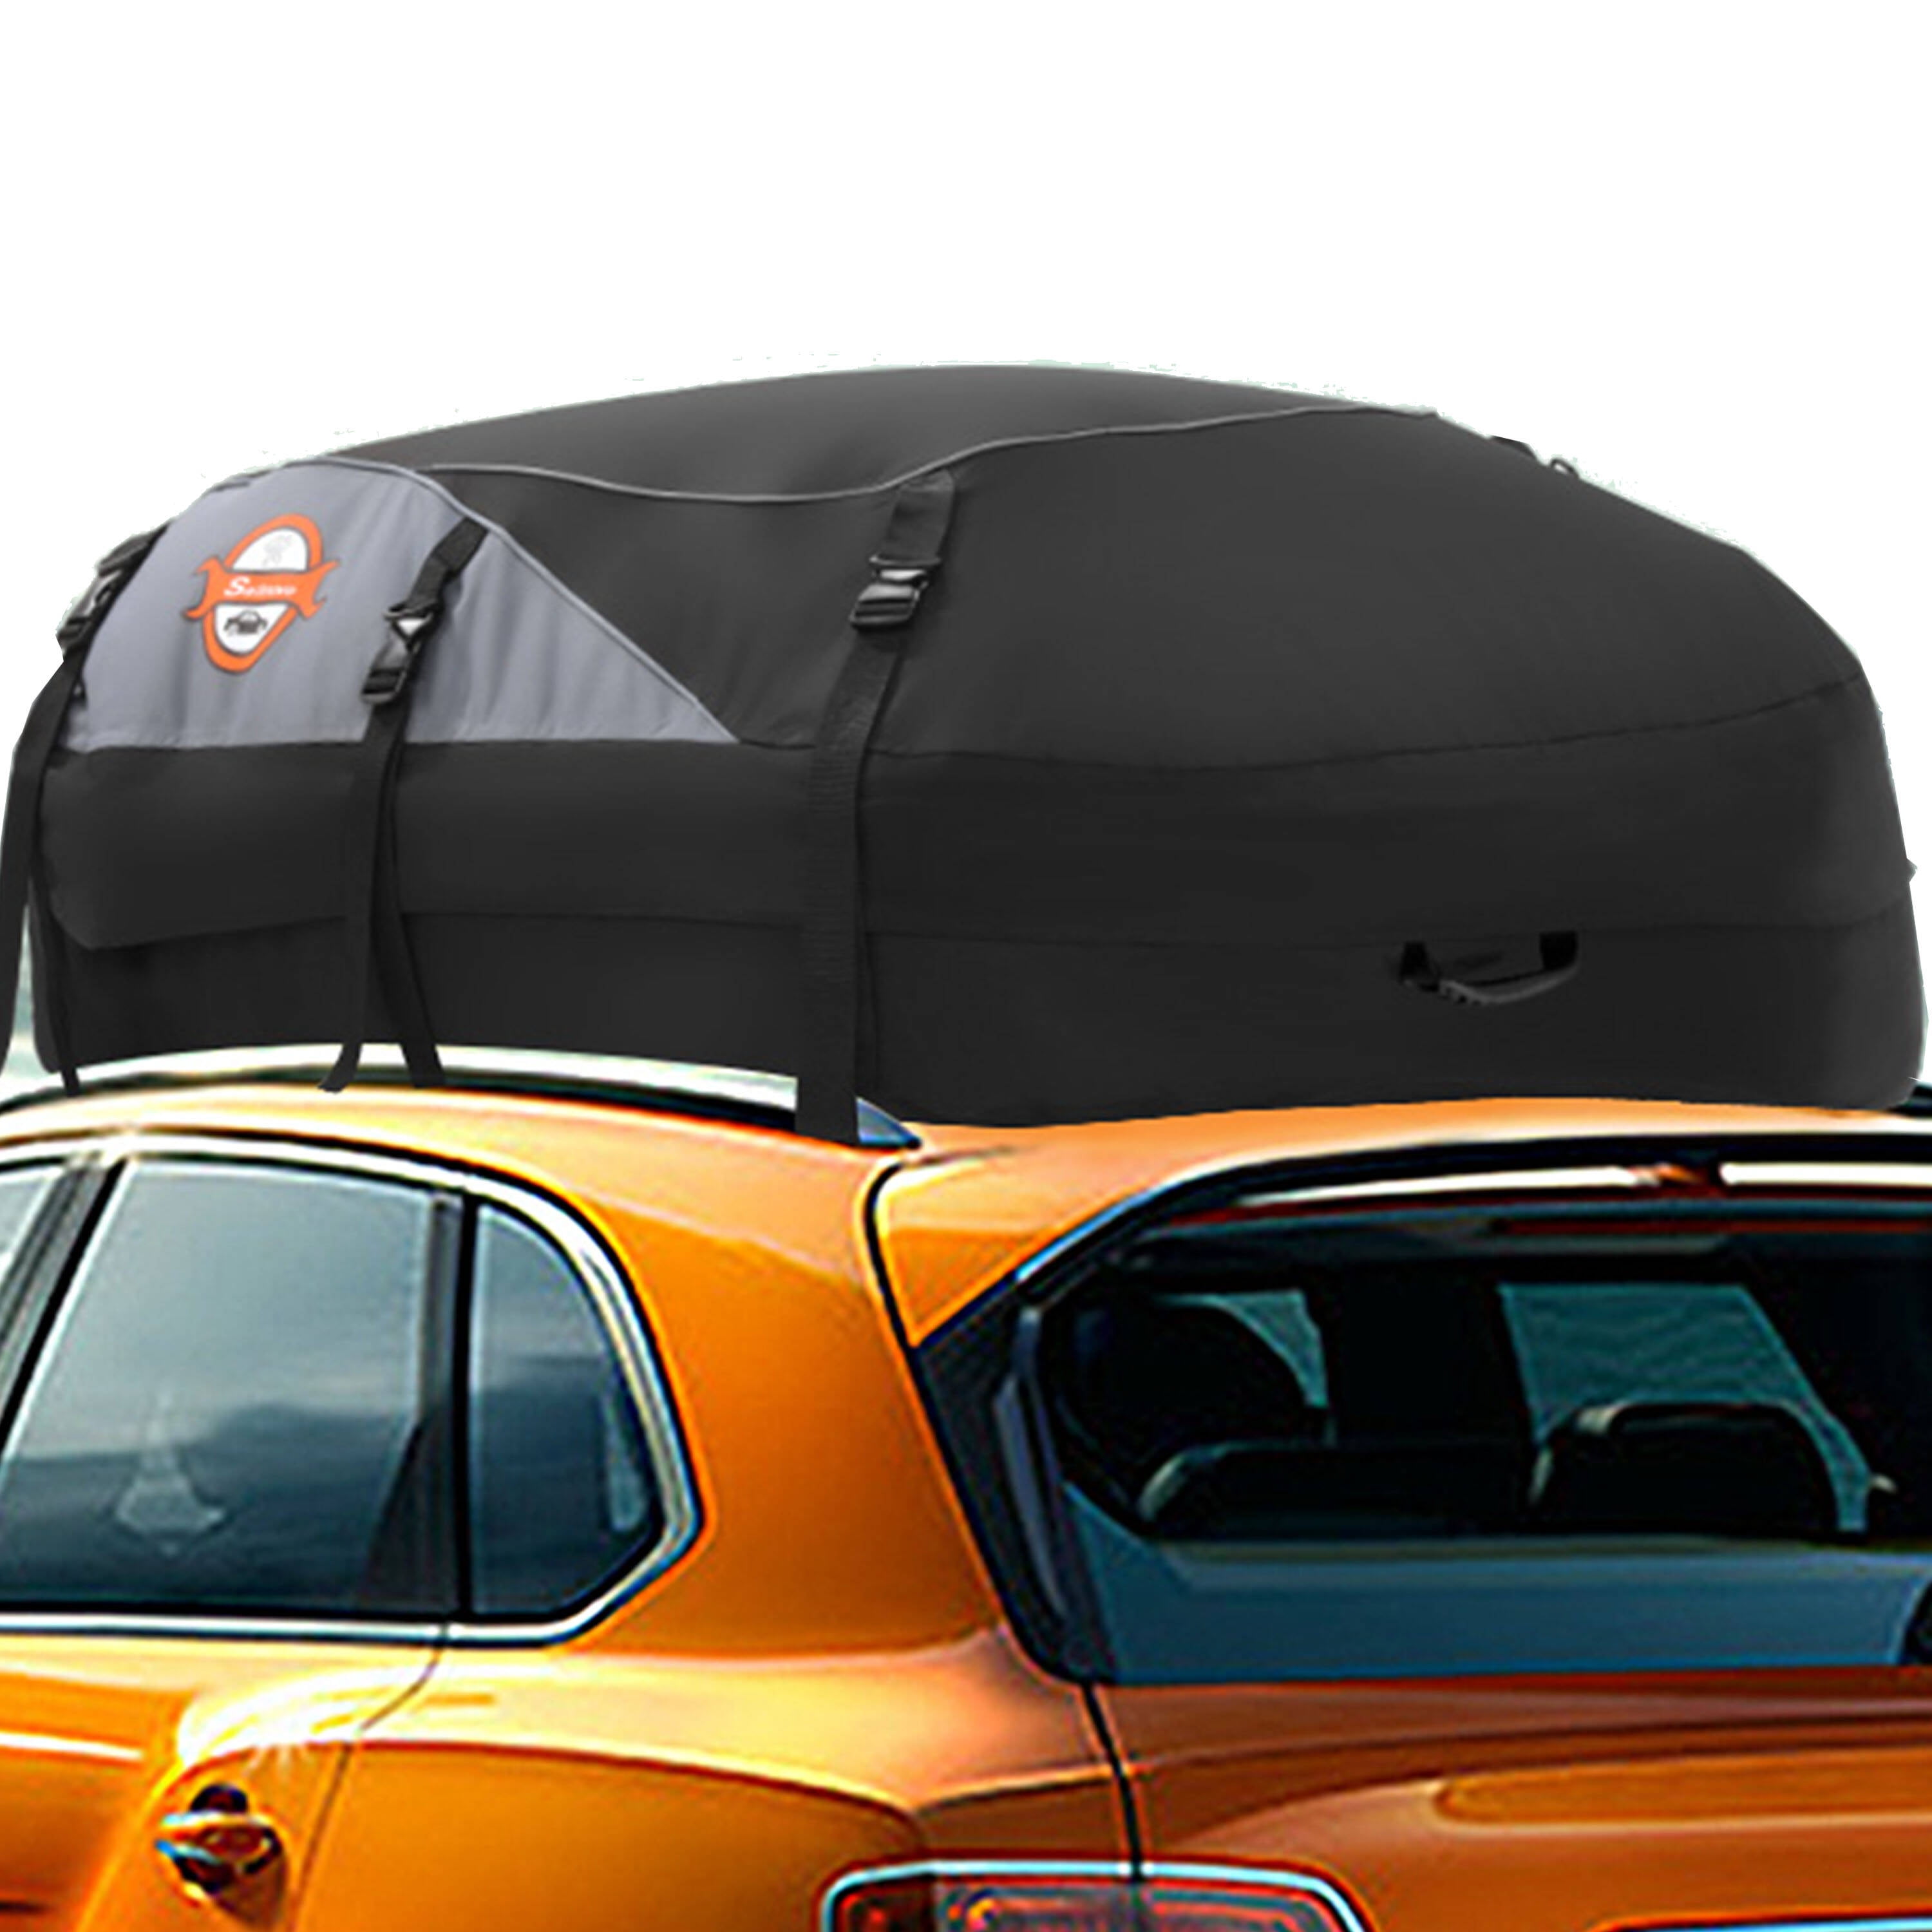 Adnoom Rooftop Cargo Carrier Bag 20 Cubic Feet Waterproof Car Roof Bag  Cargo Carrier Vehicle Soft-Shell Carriers Storage Carrying Bag + 8  Reinforced